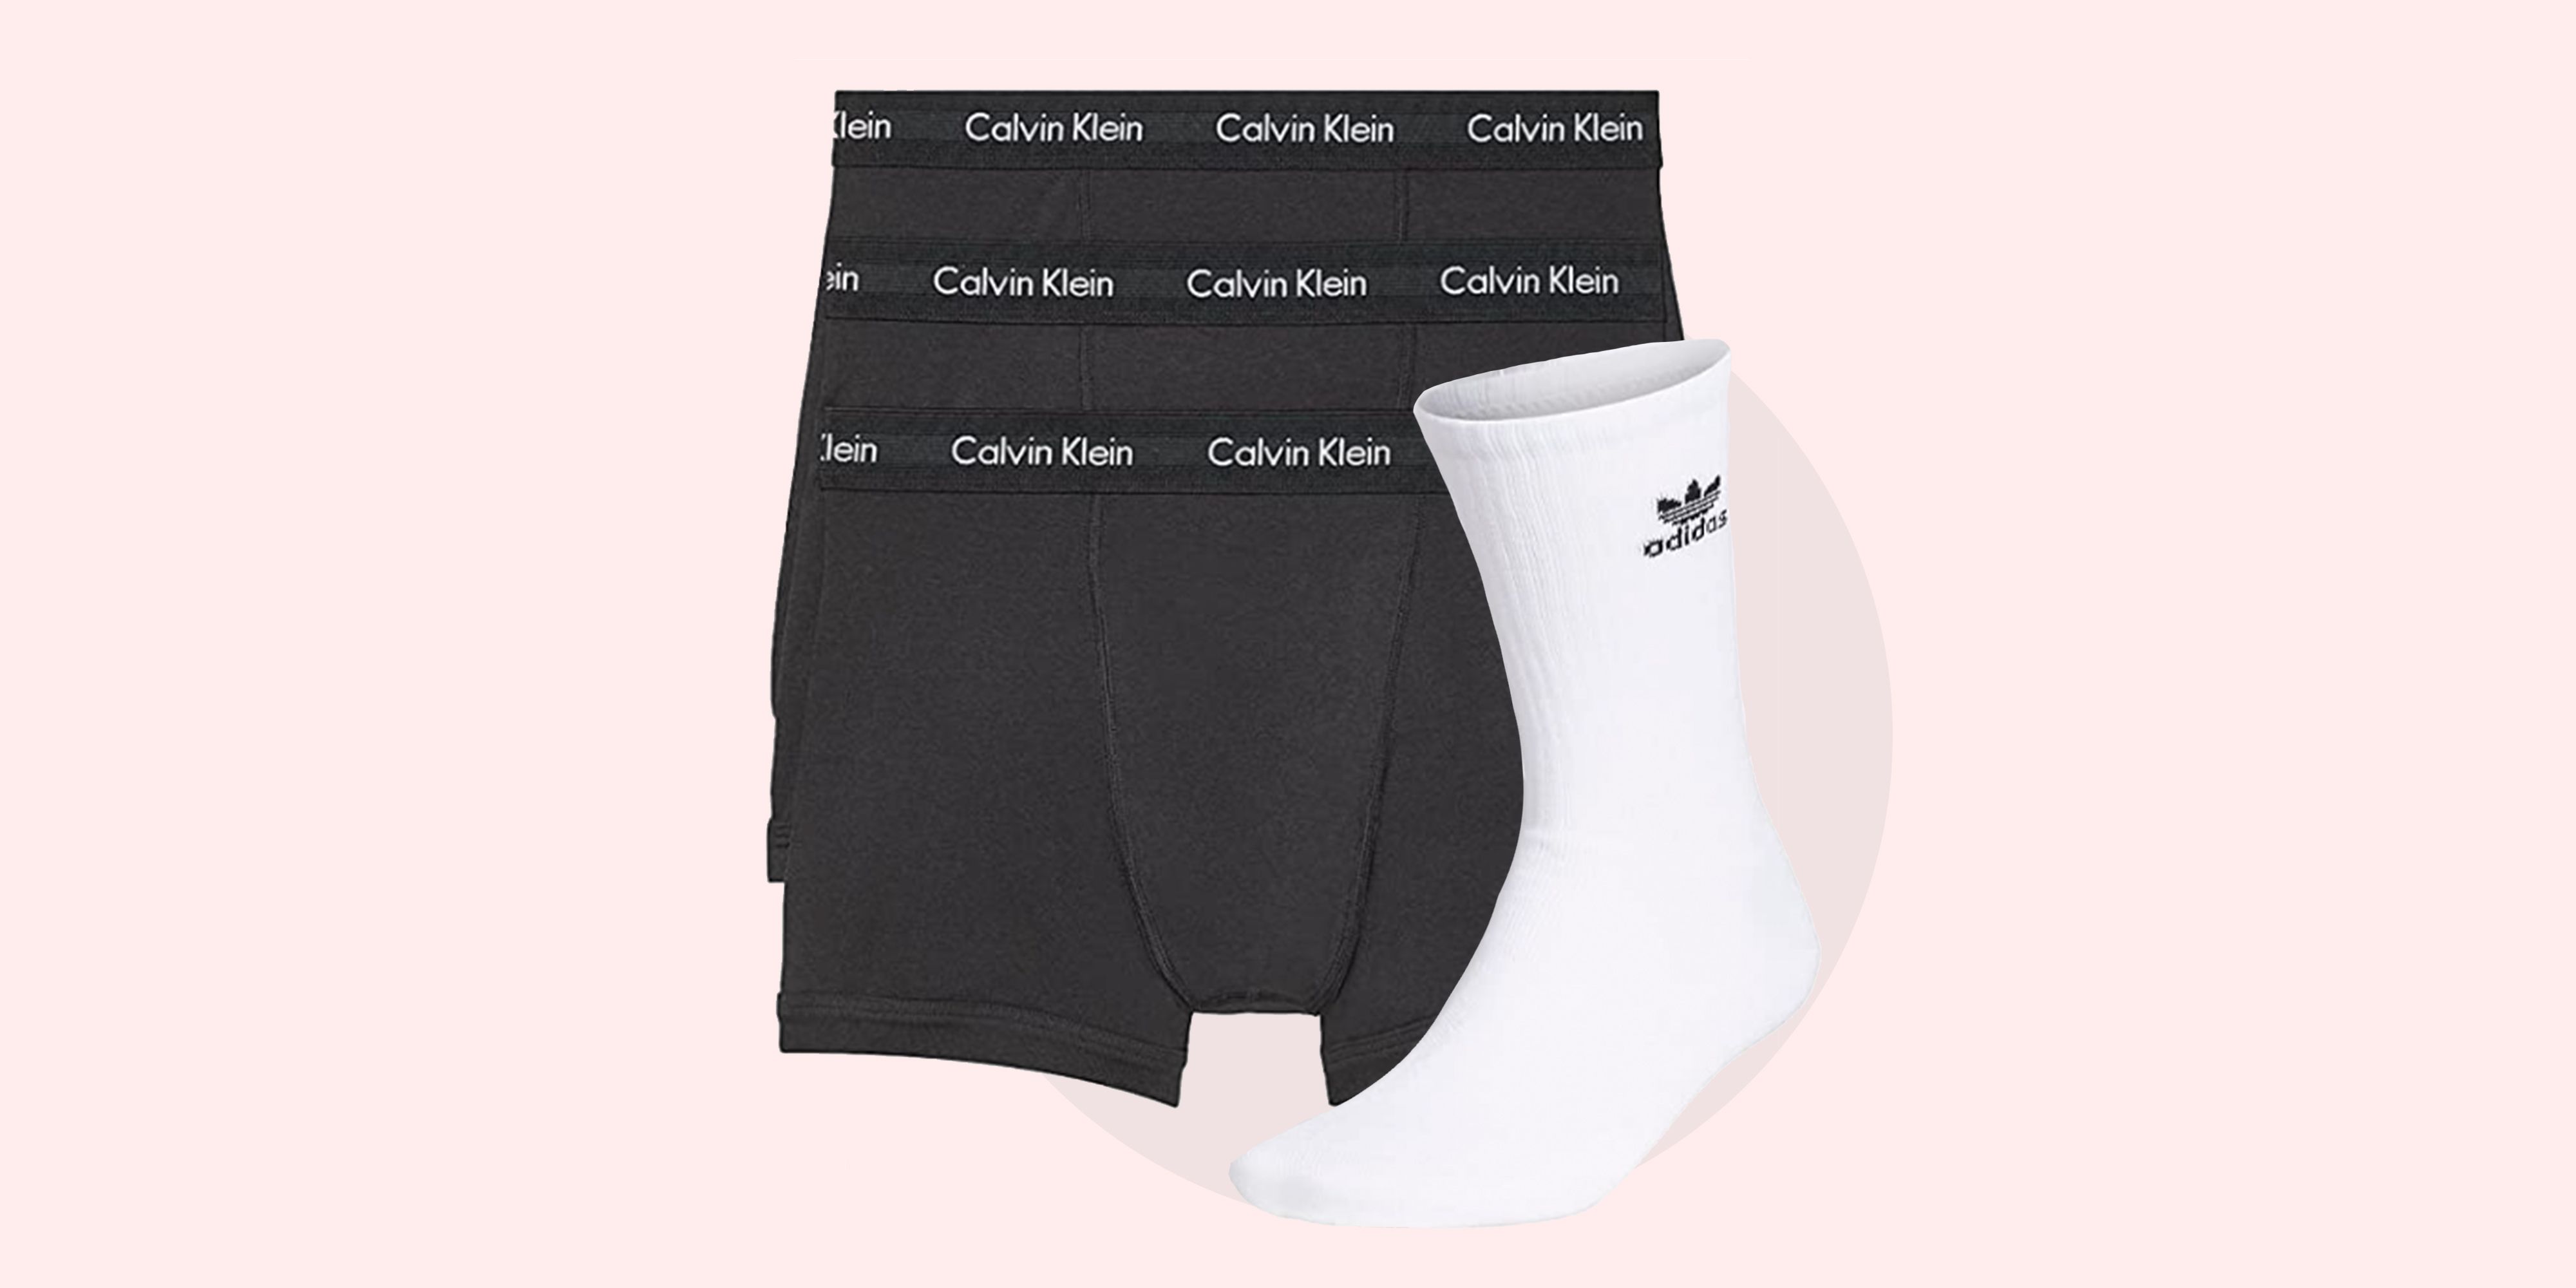 Calvin Klein undergarments are over 50% off for Prime Day